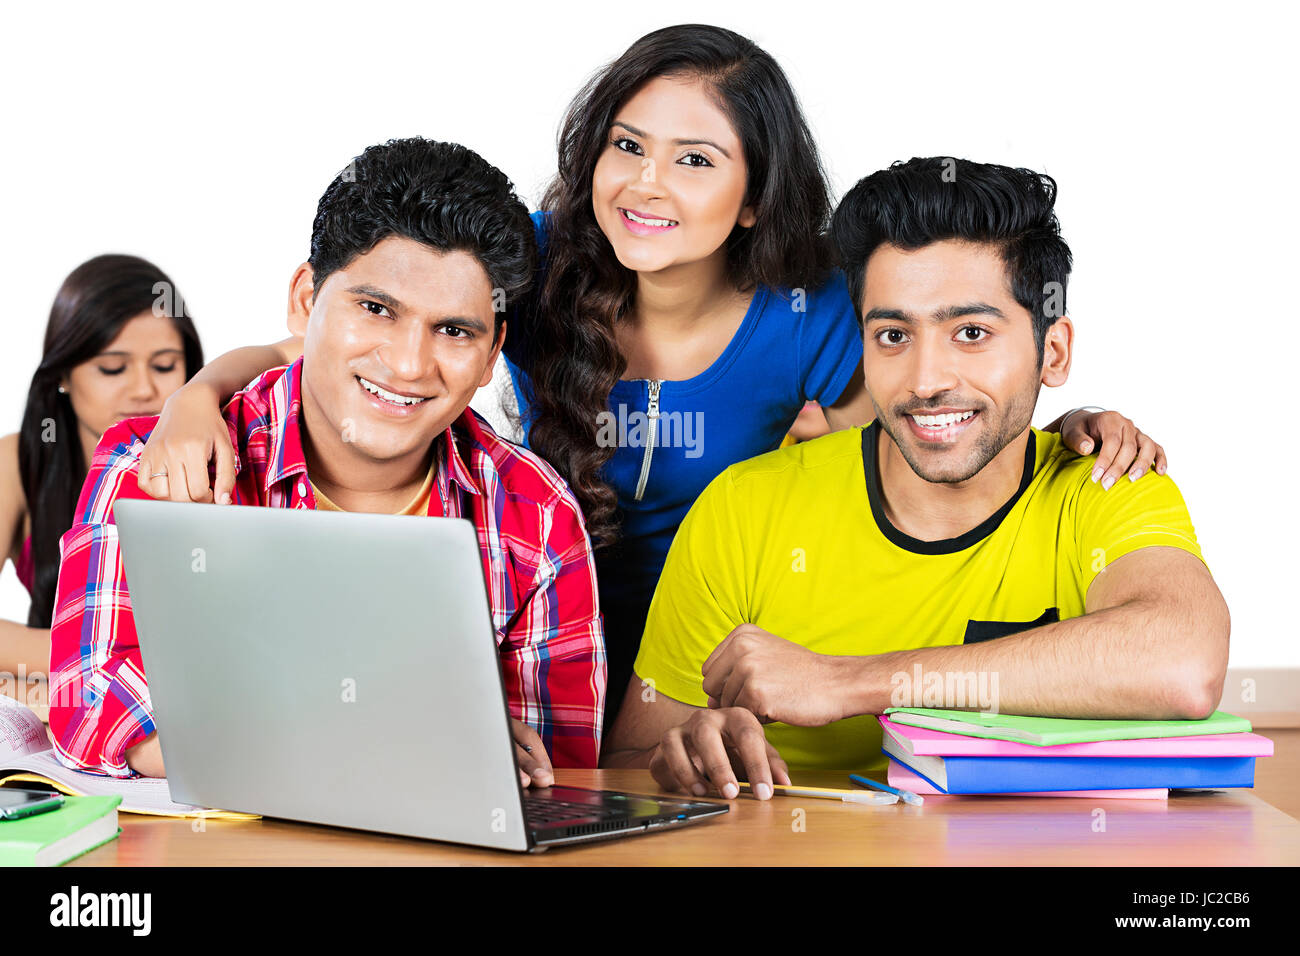 College Friends Student Studying Laptop Classroom Classmate Stock Photo